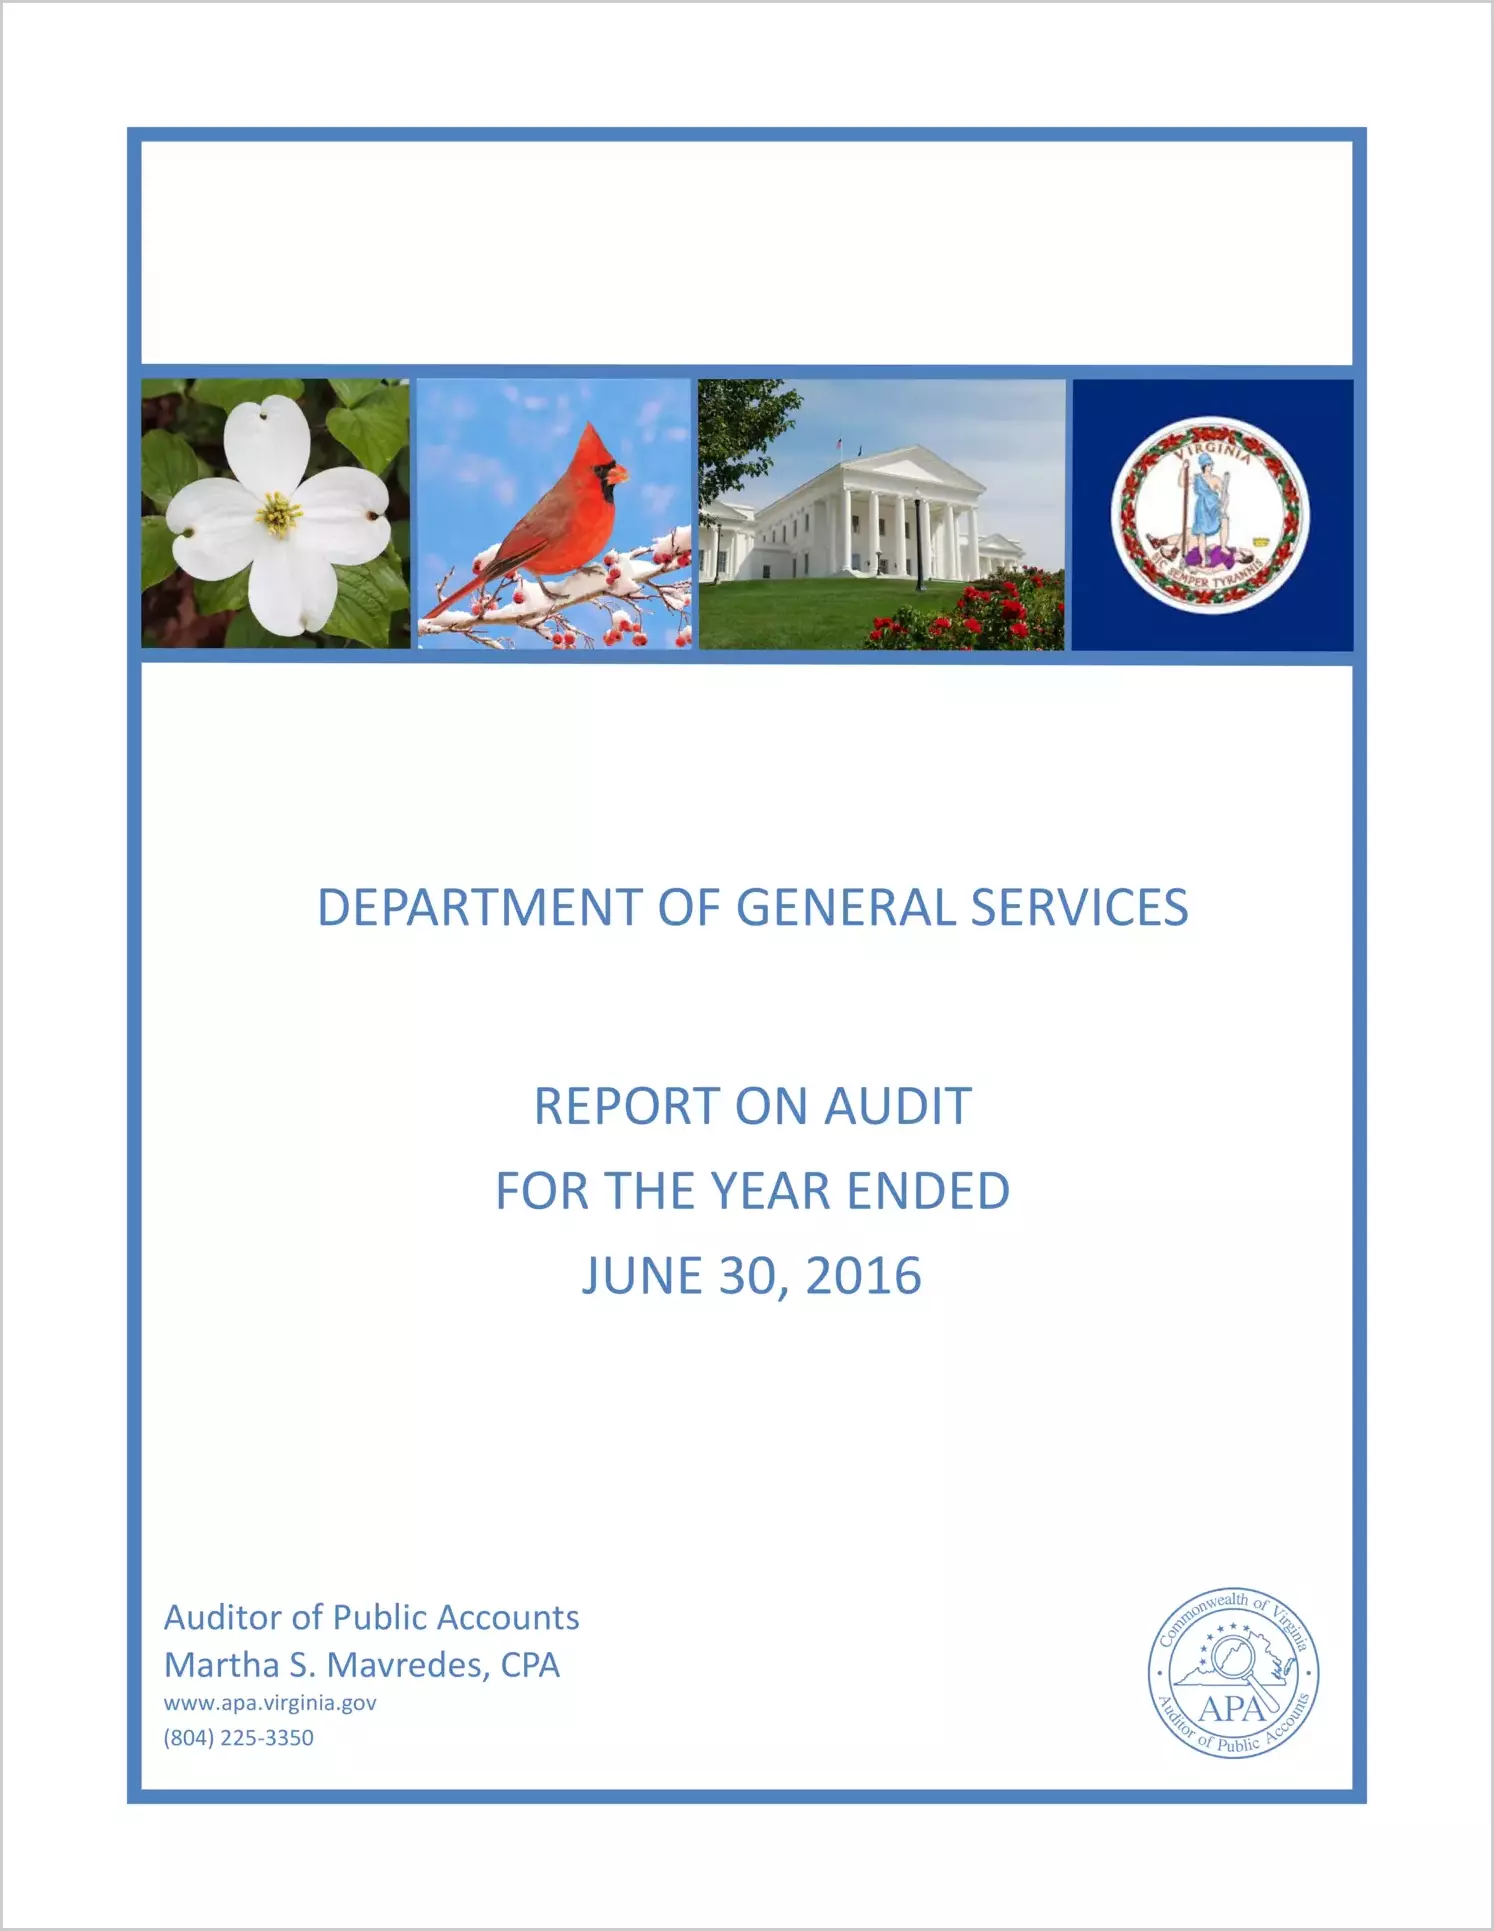 Department of General Services for the year ended June 30, 2016